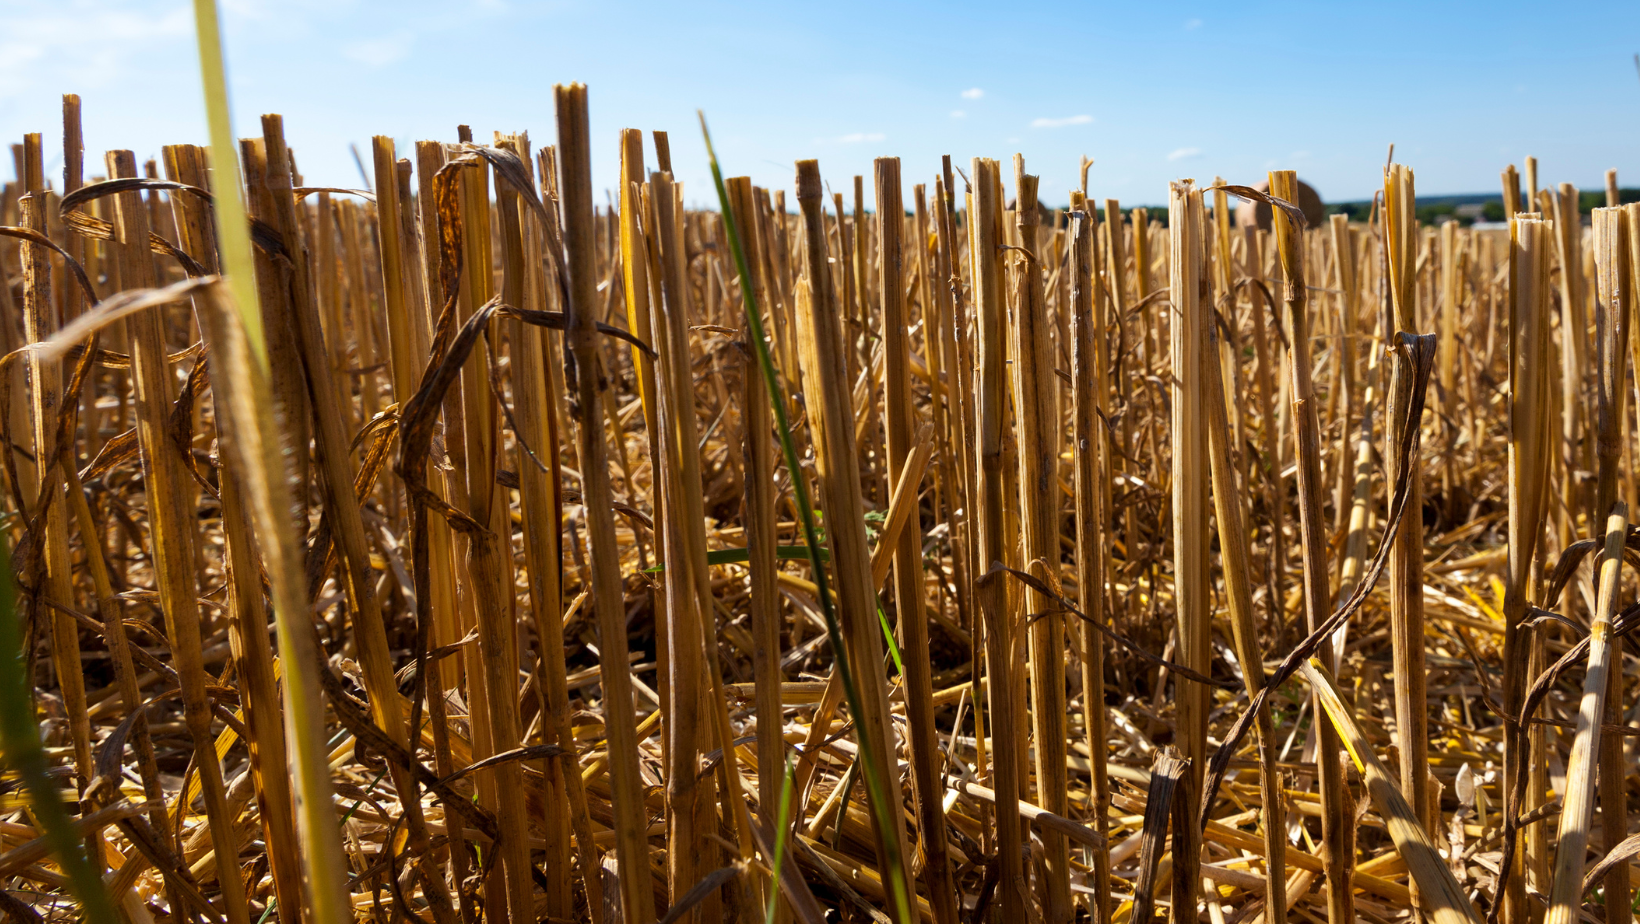 What is wheat straw used for? — Washington Wheat Foundation